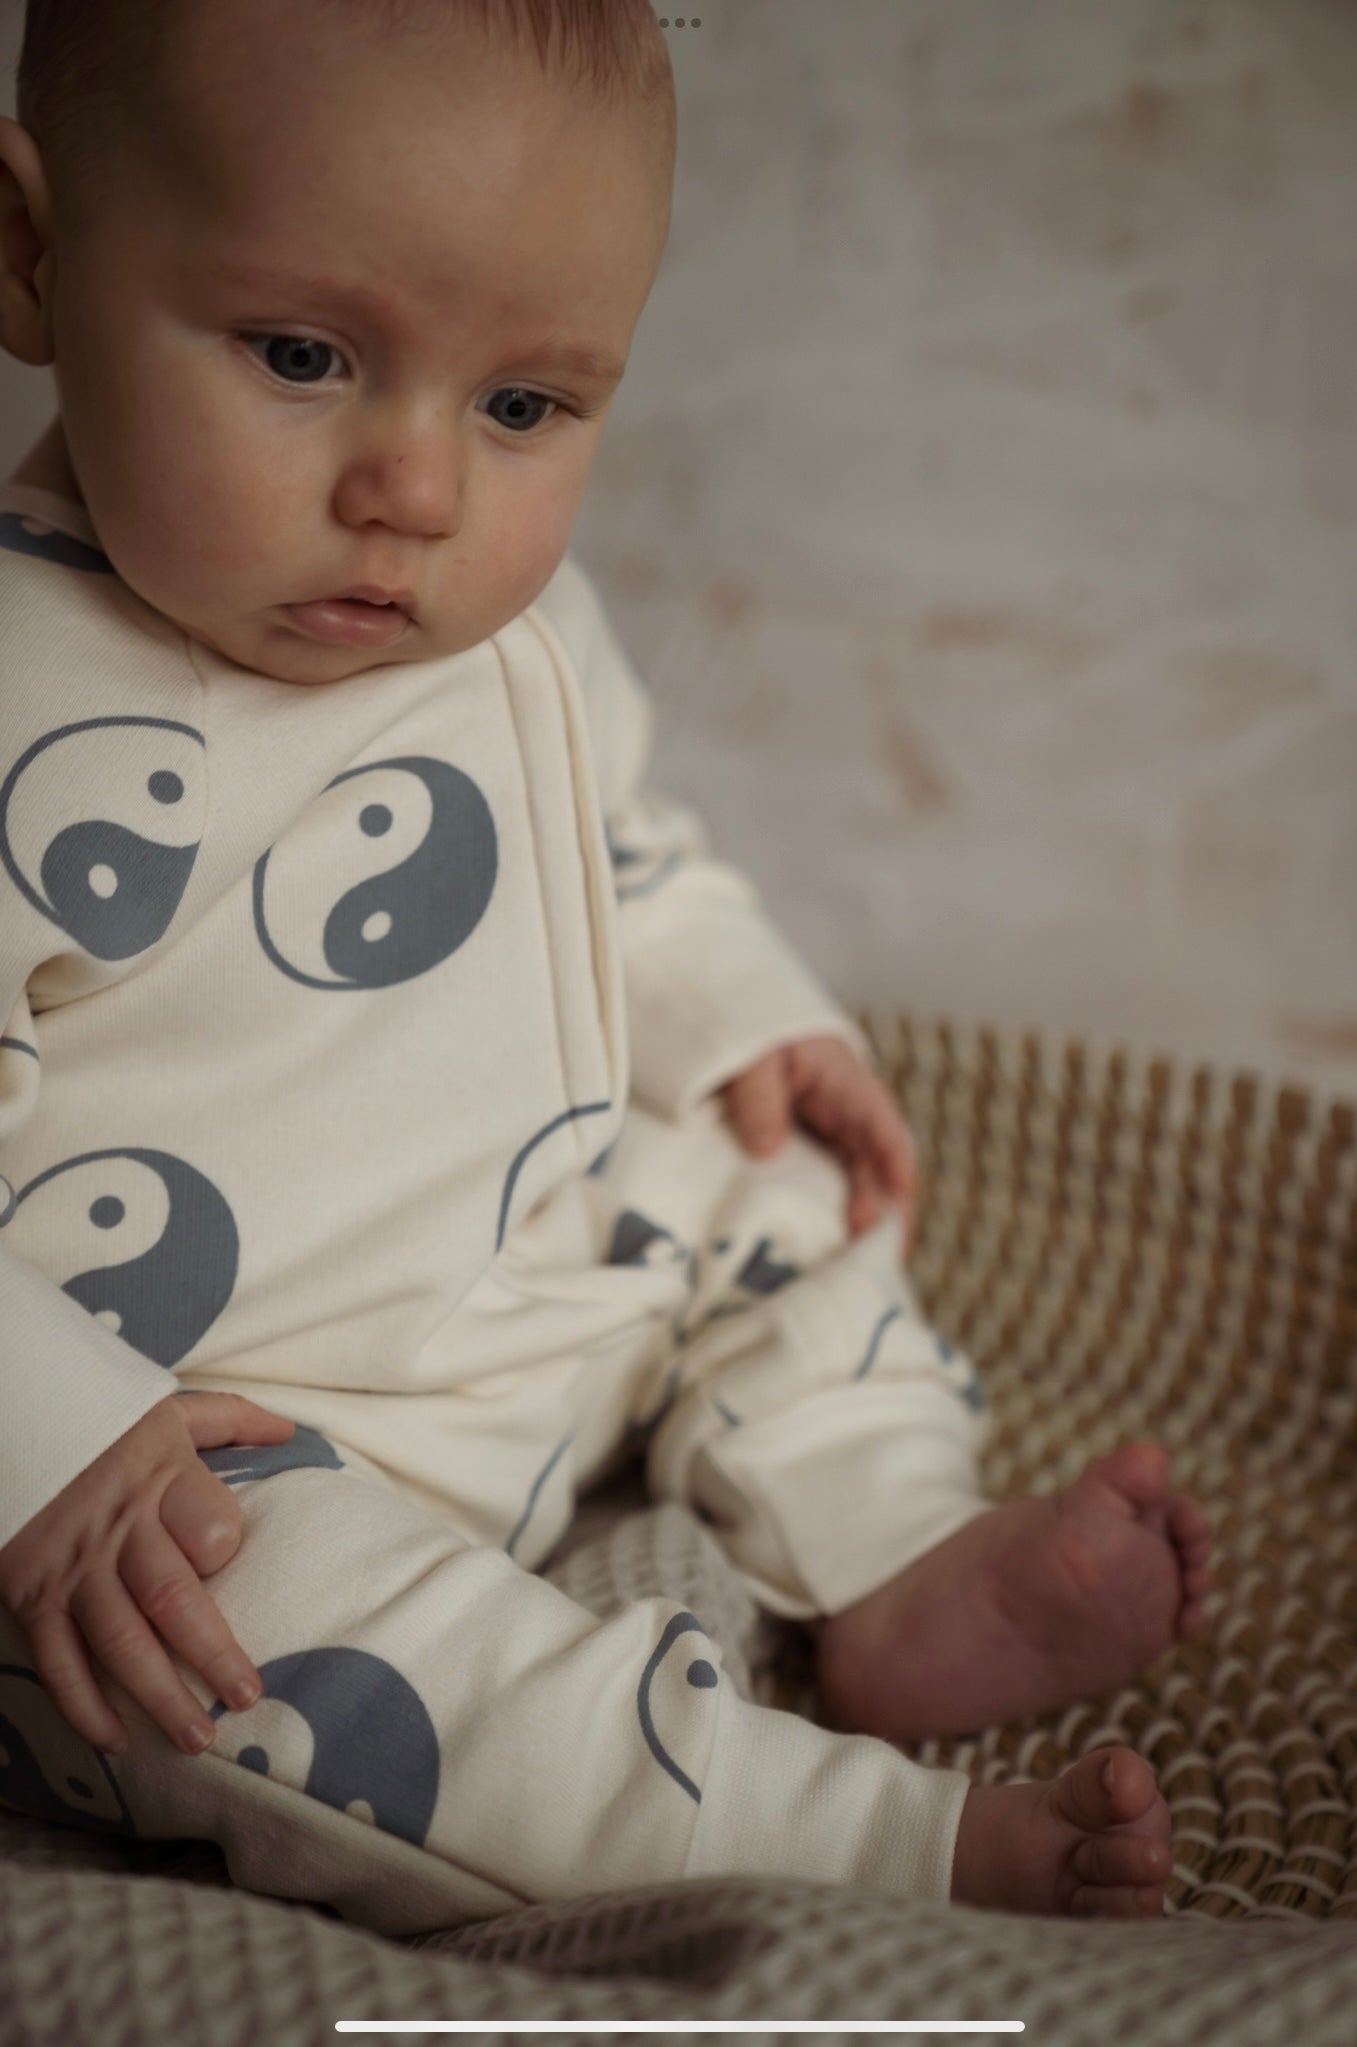 Load image into Gallery viewer, Another fox yin Yang zip sleepsuit, newborn clothing, baby clothing, baby sleepsuit, newborn gift, beautiful new baby gift, Baby shower gift, new baby present, Nottinghamshire stockist, Another Fox stockist
